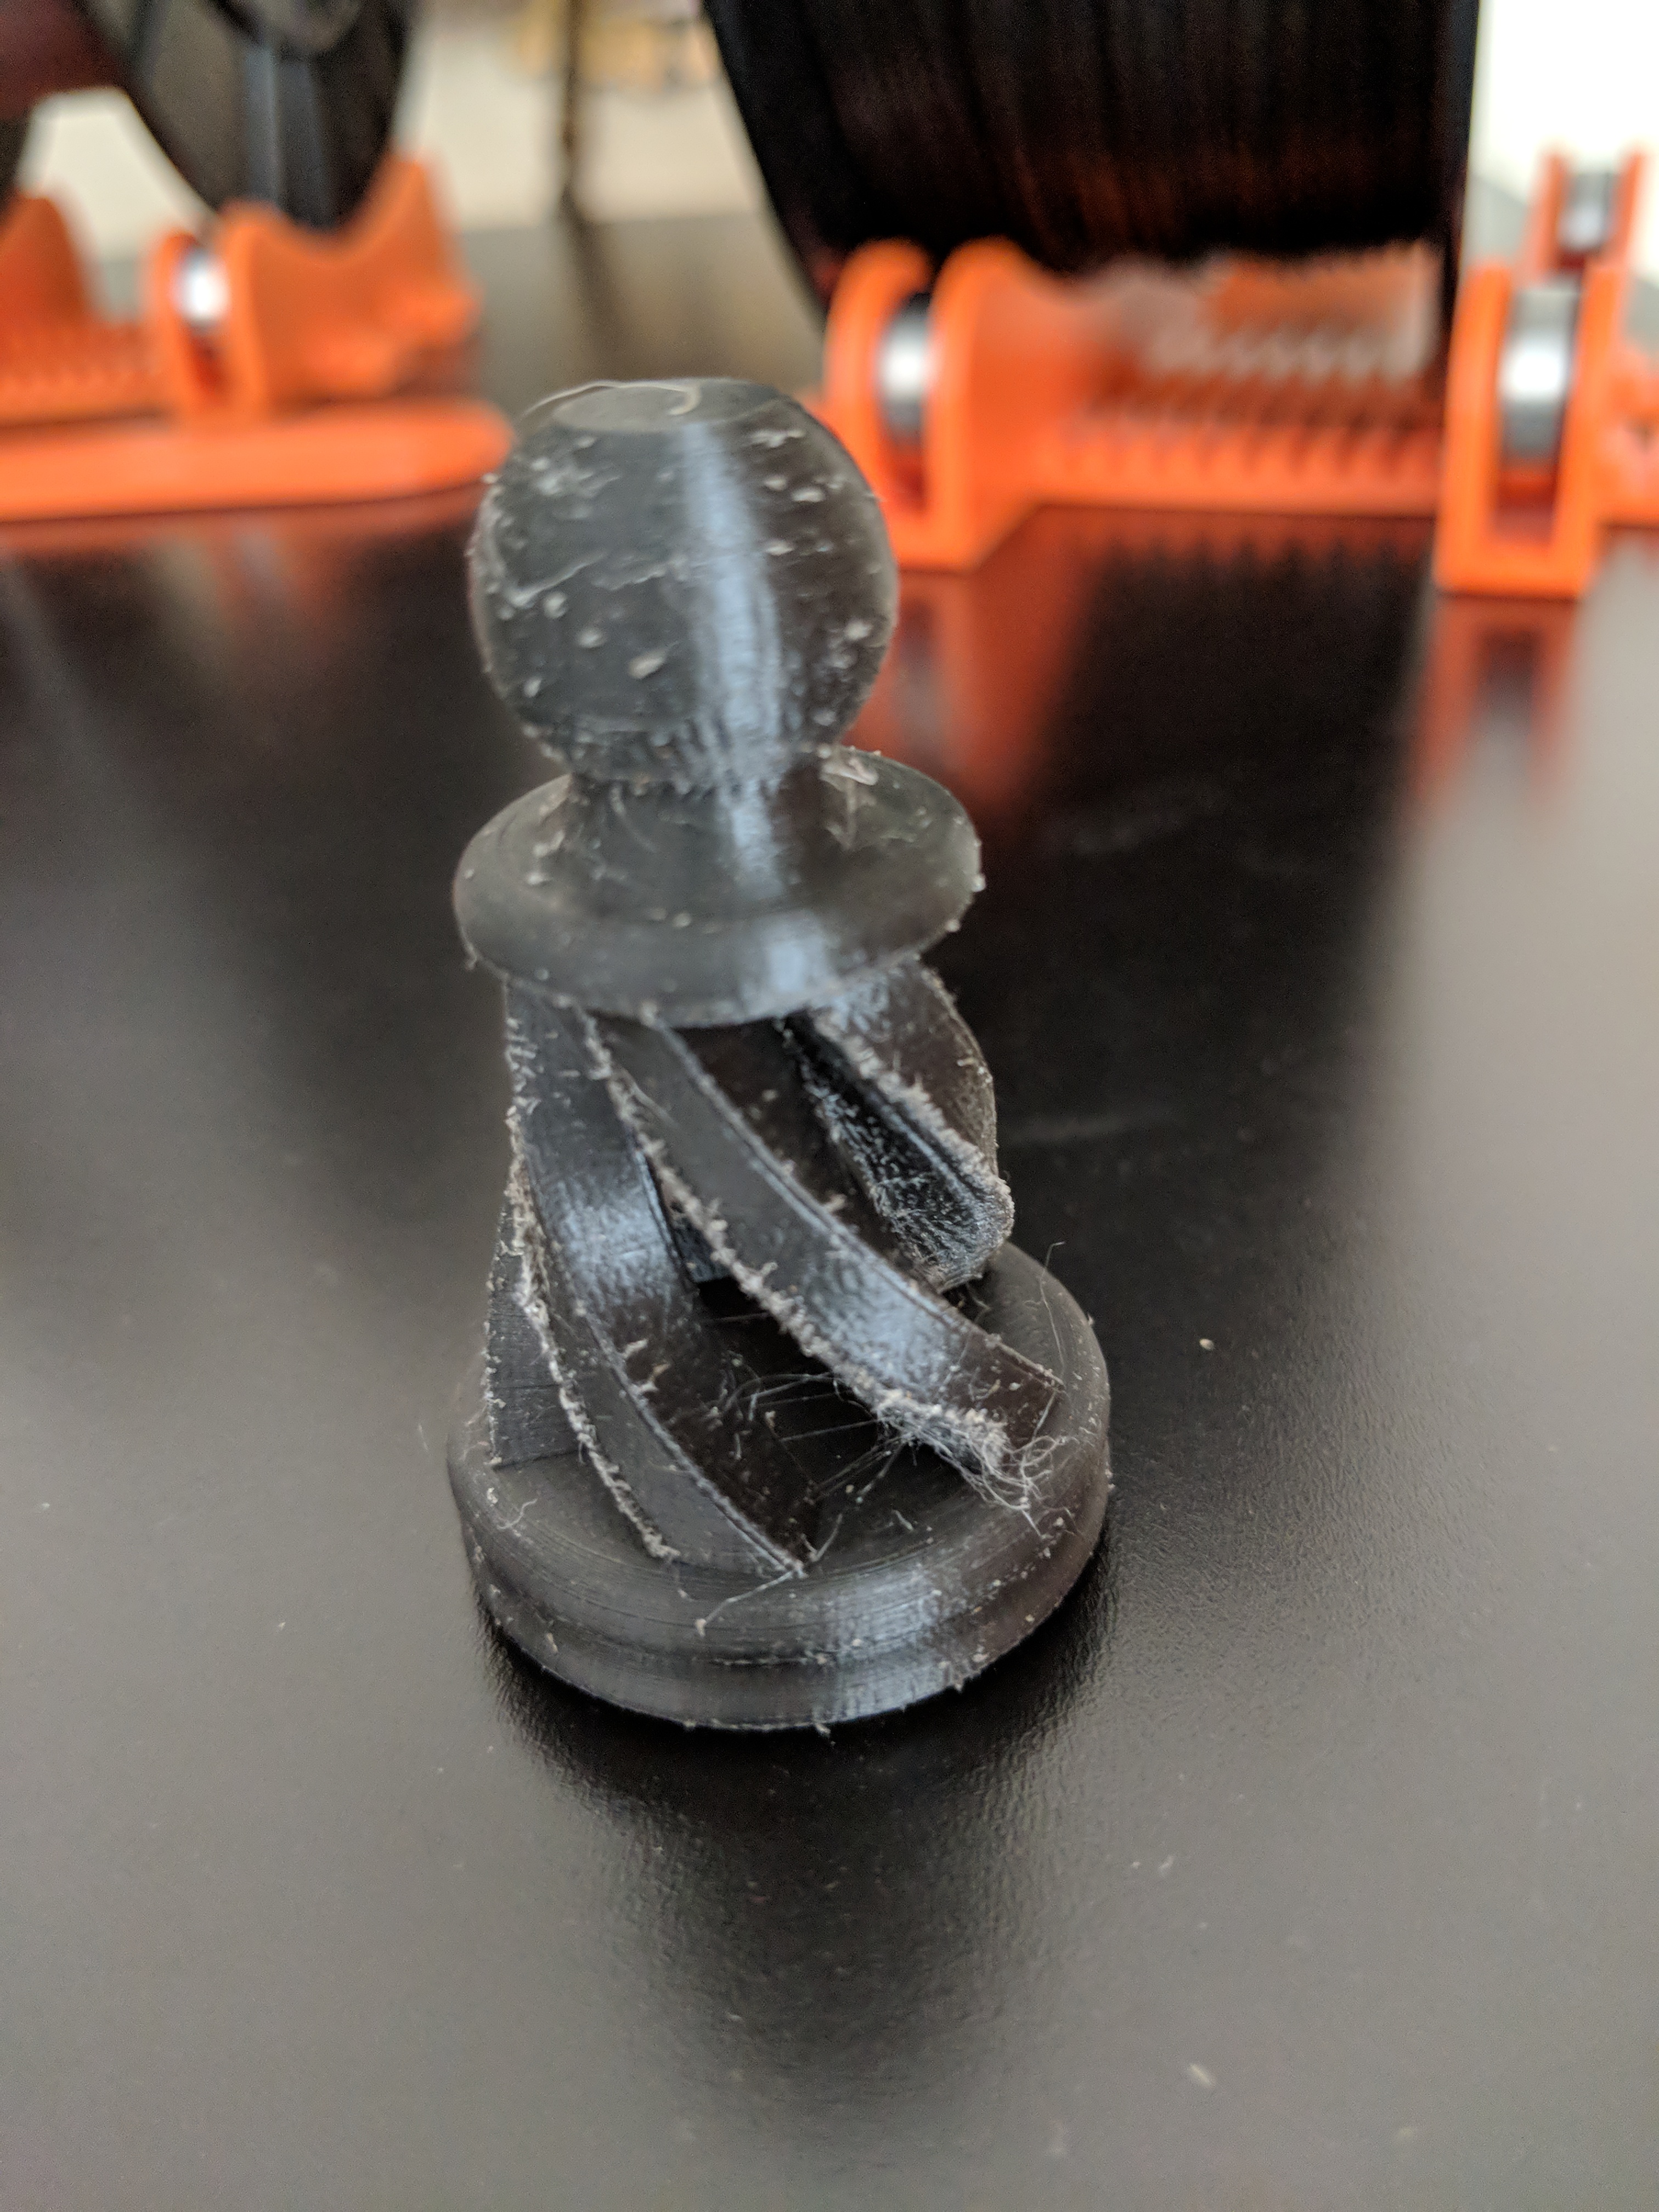 Retraction issues. It seems I cannot get retraction to work, - 3D